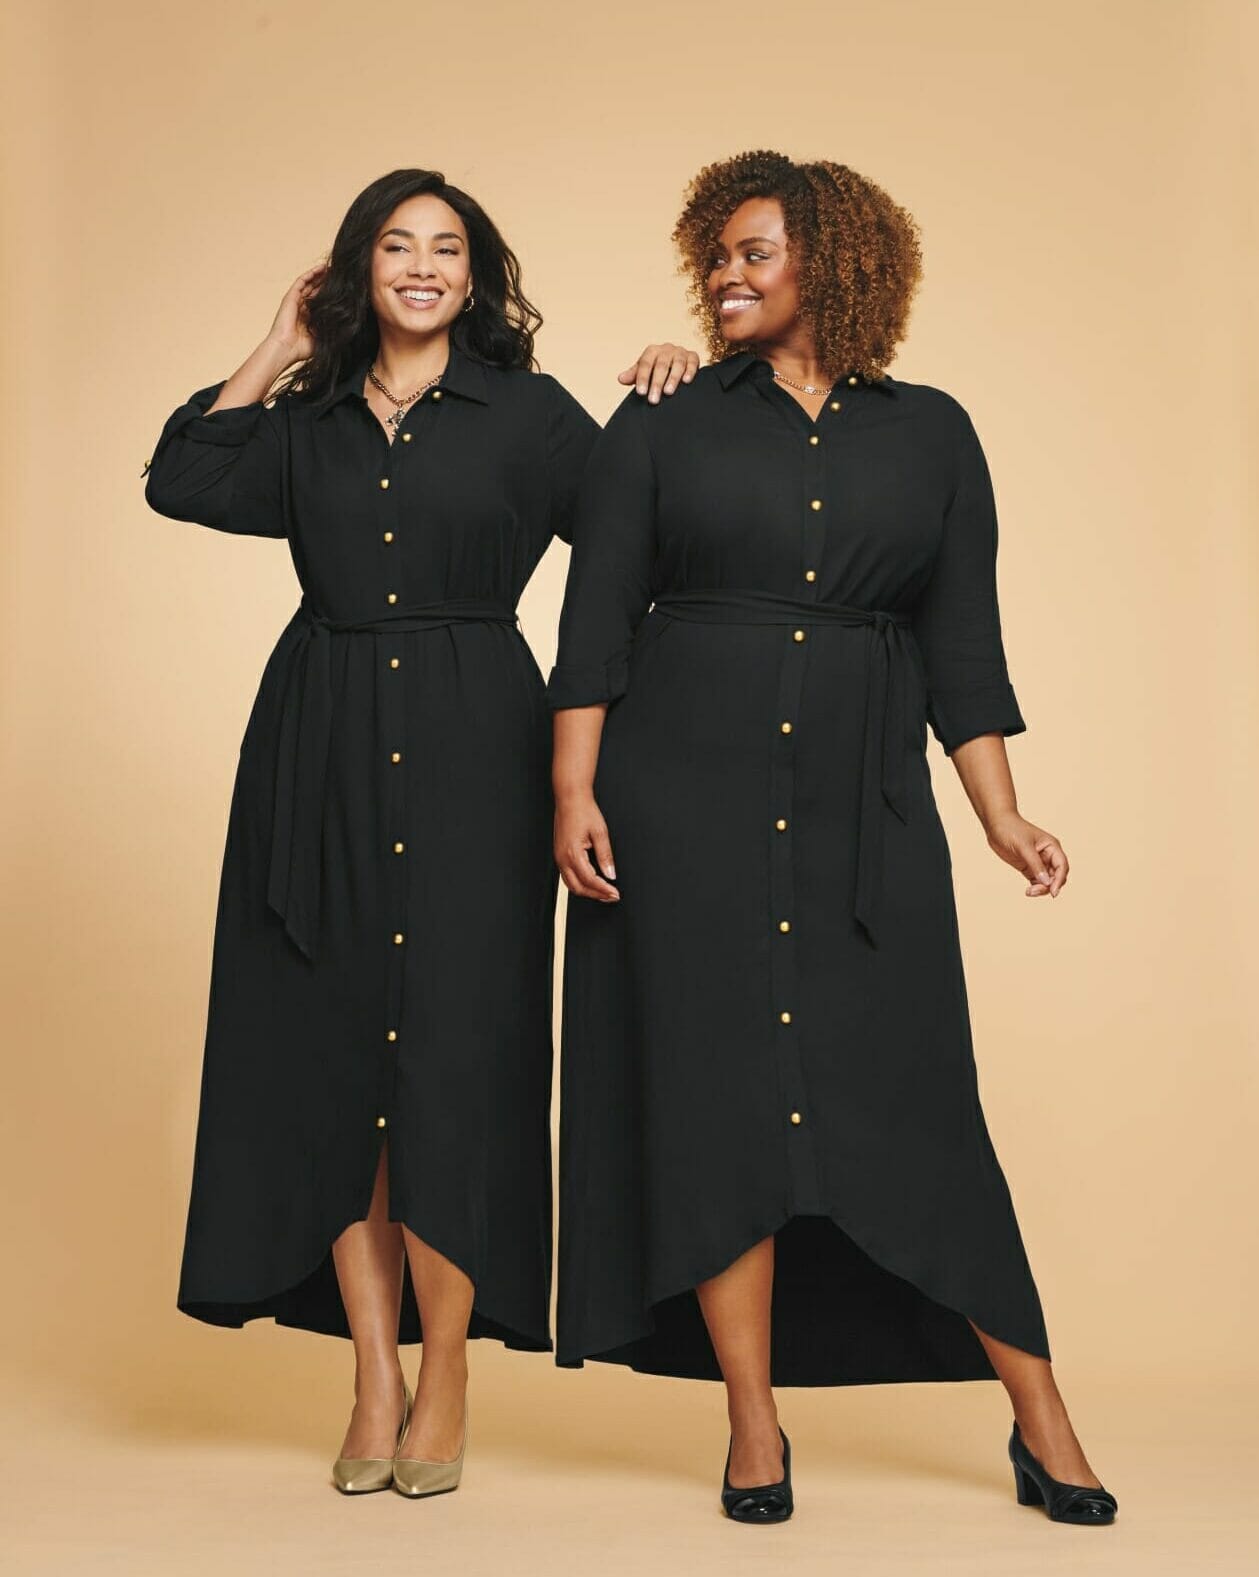 8 Beautiful Plus Size Dresses For All Occasions And Body Types